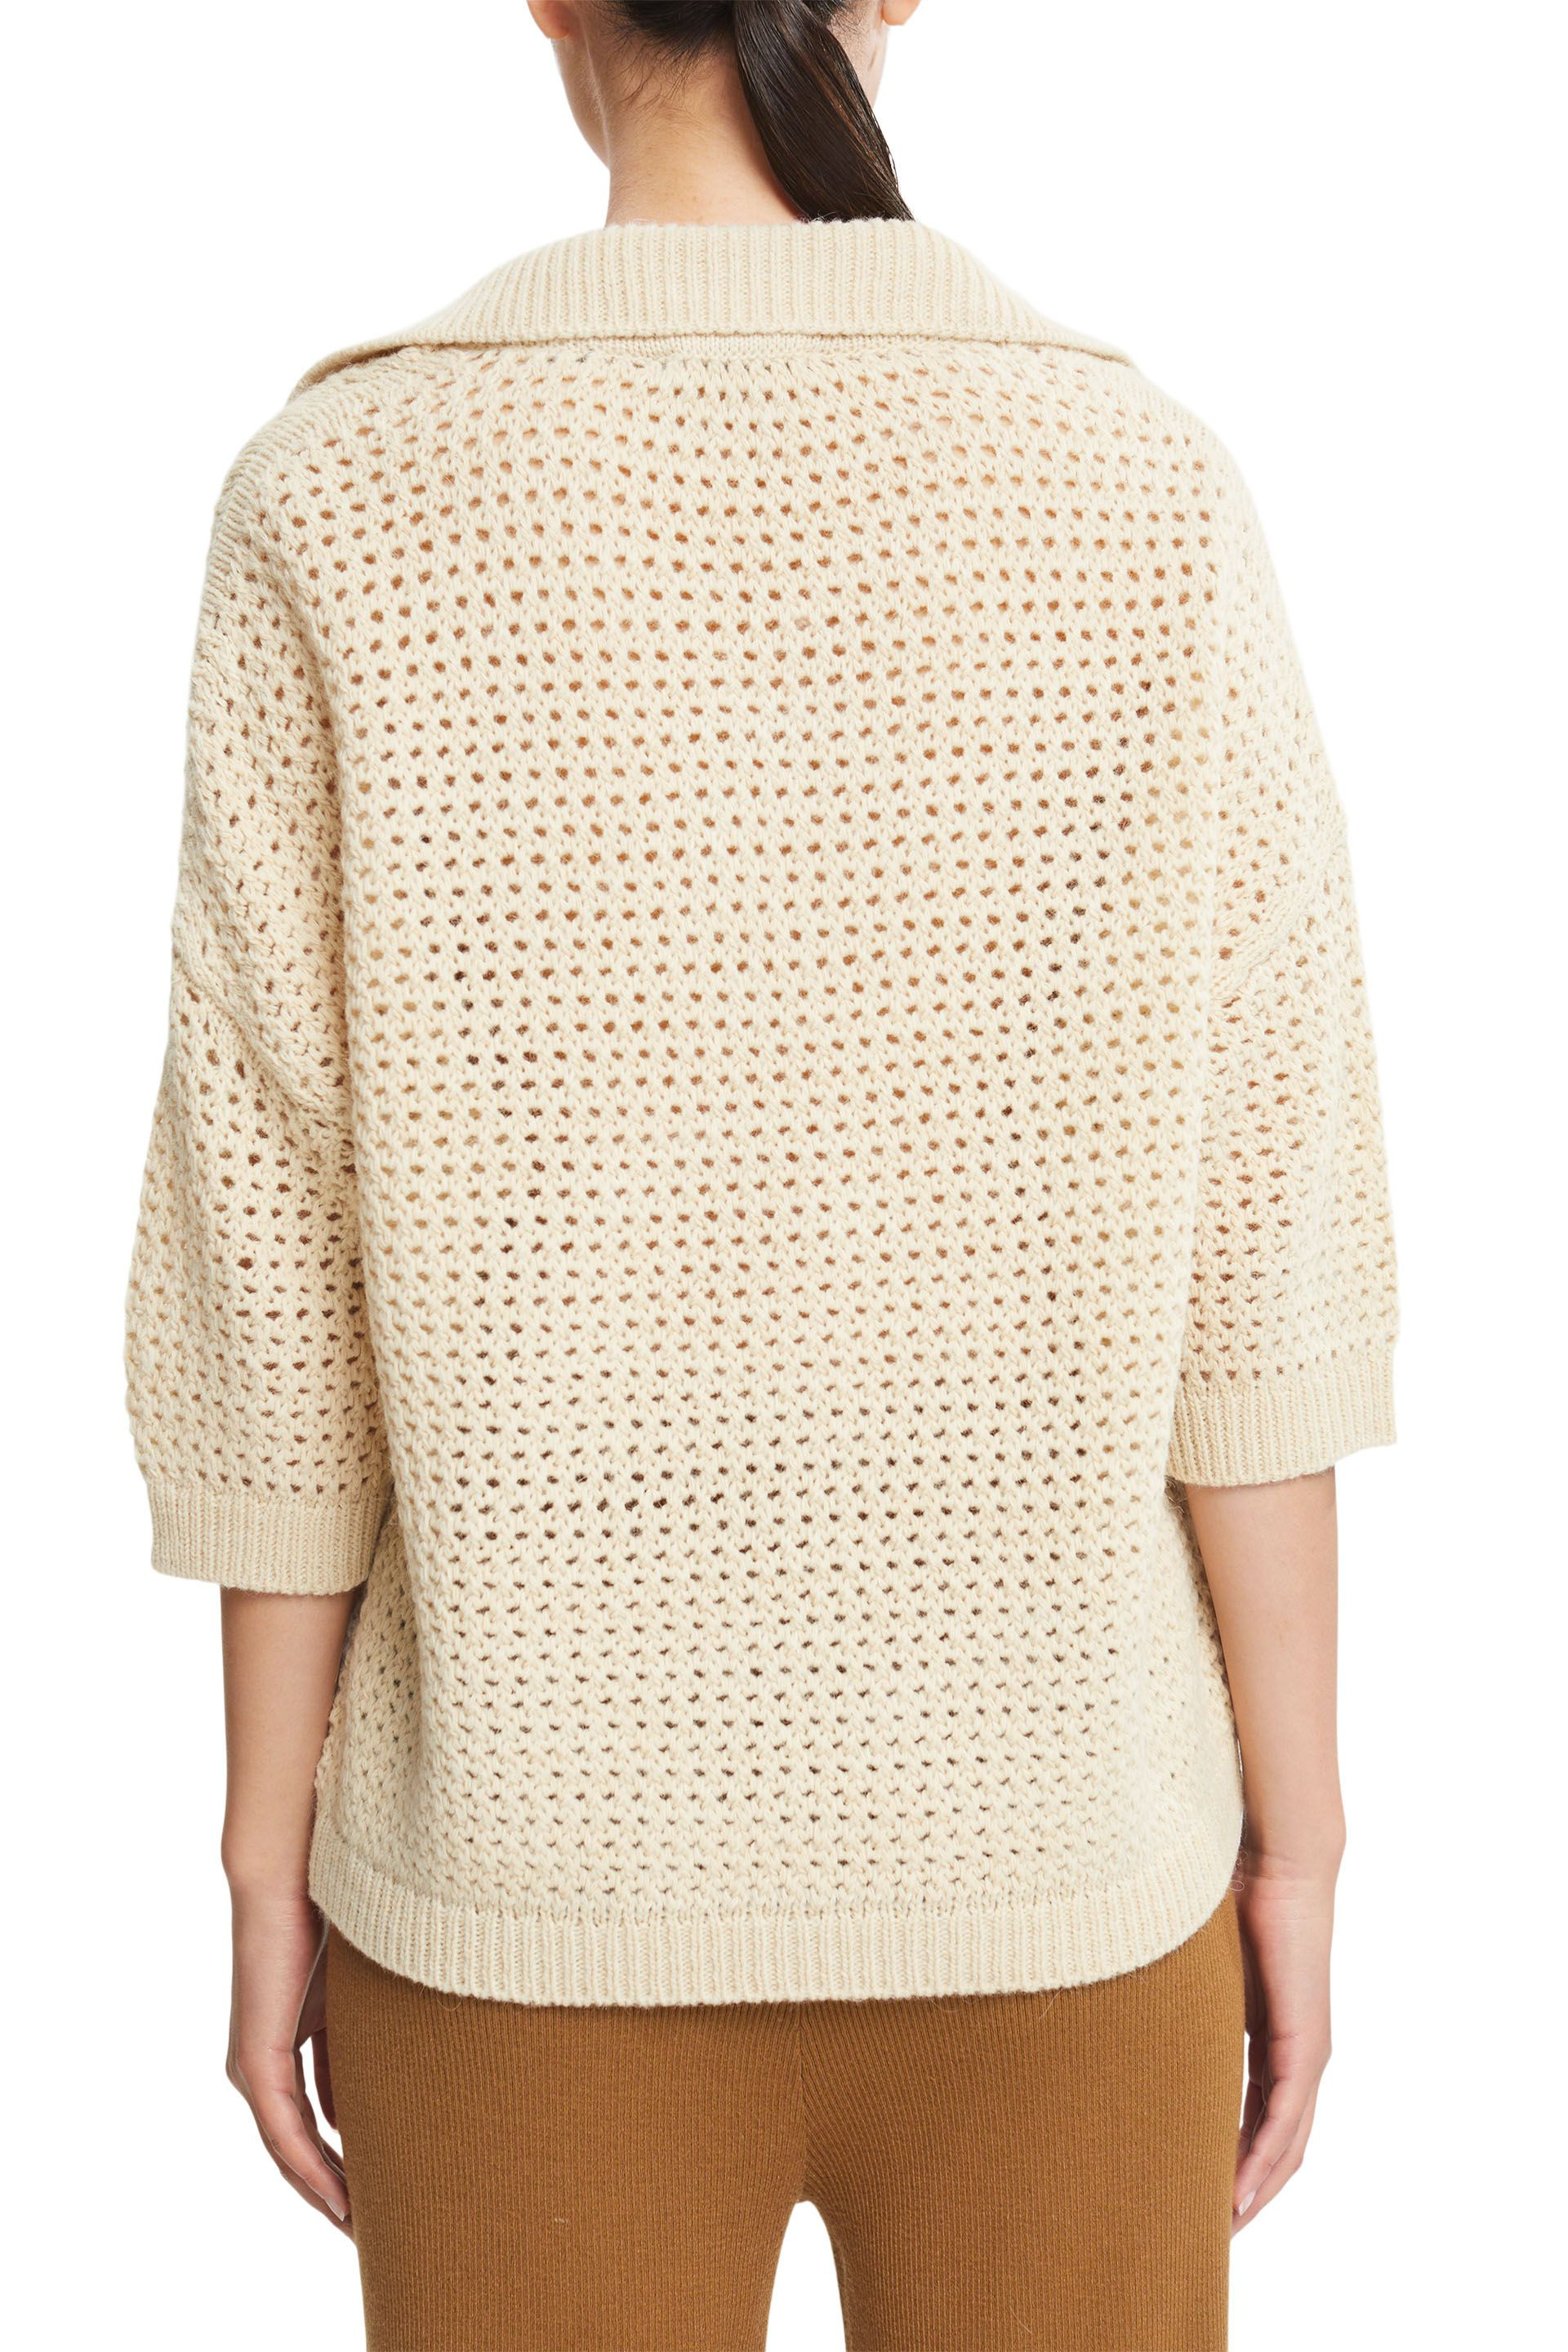 Pullover in structured mesh, Beige, large image number 2